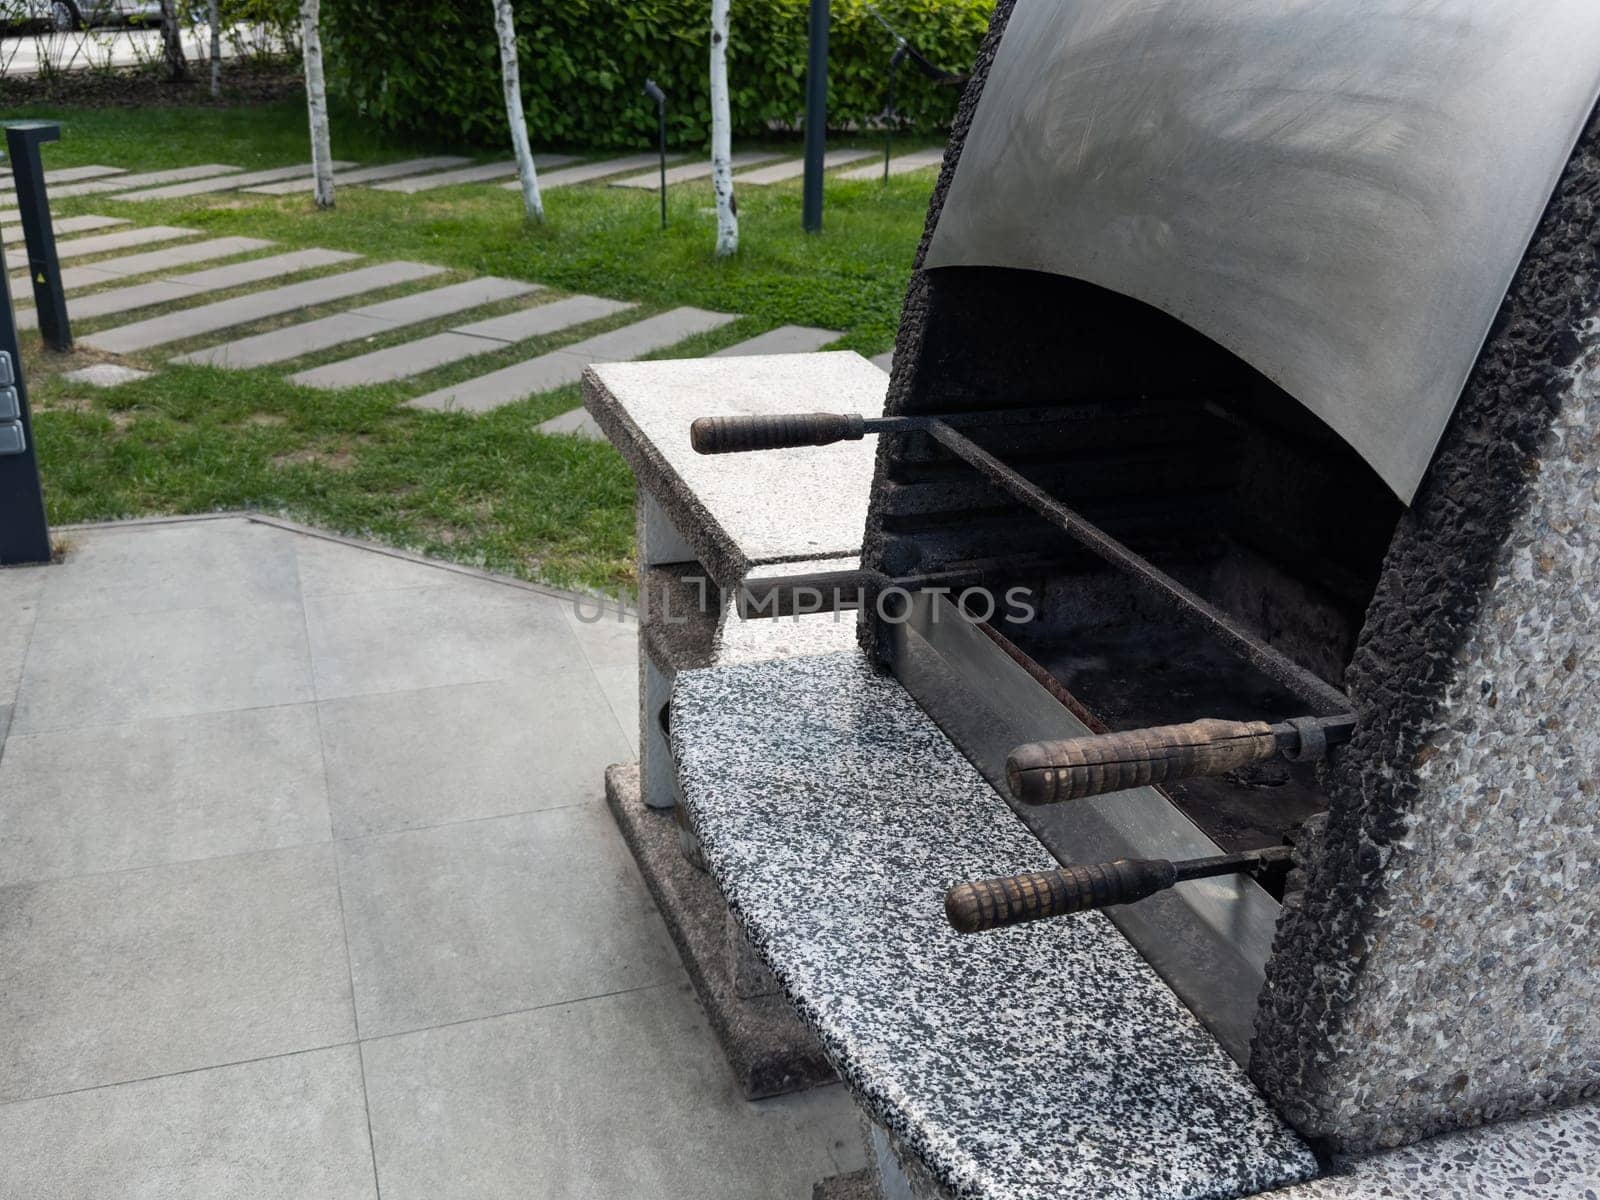 Outdoor BBQ grill. Barbecue open fireplace for cooking. High quality photo